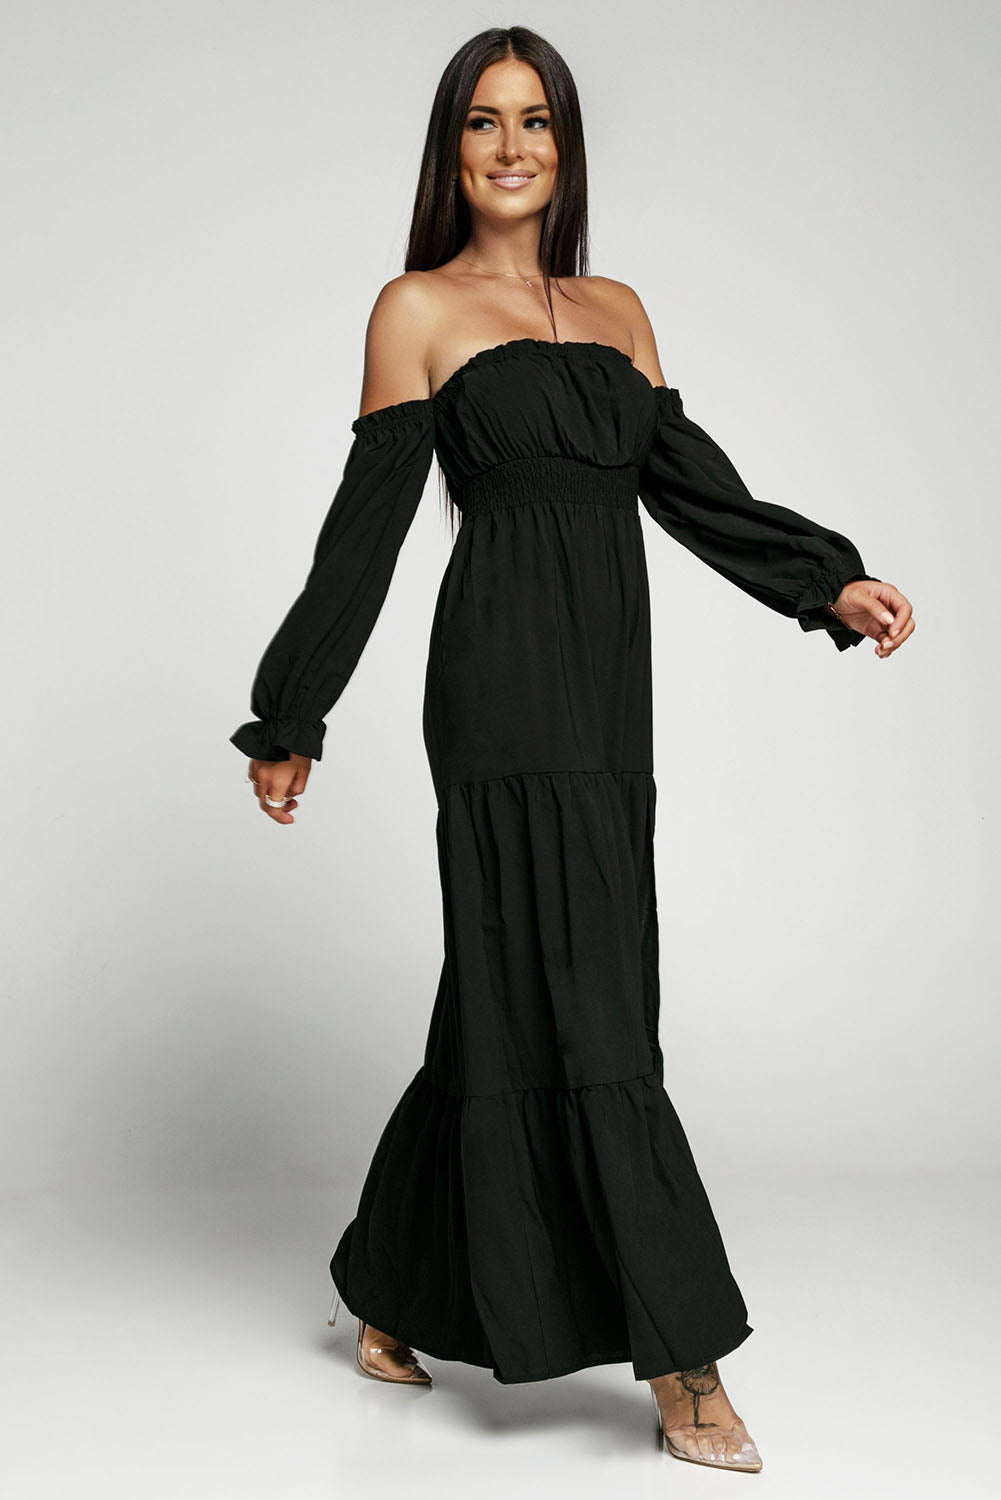 Shoulder and Tiered Maxi Adventure Dress